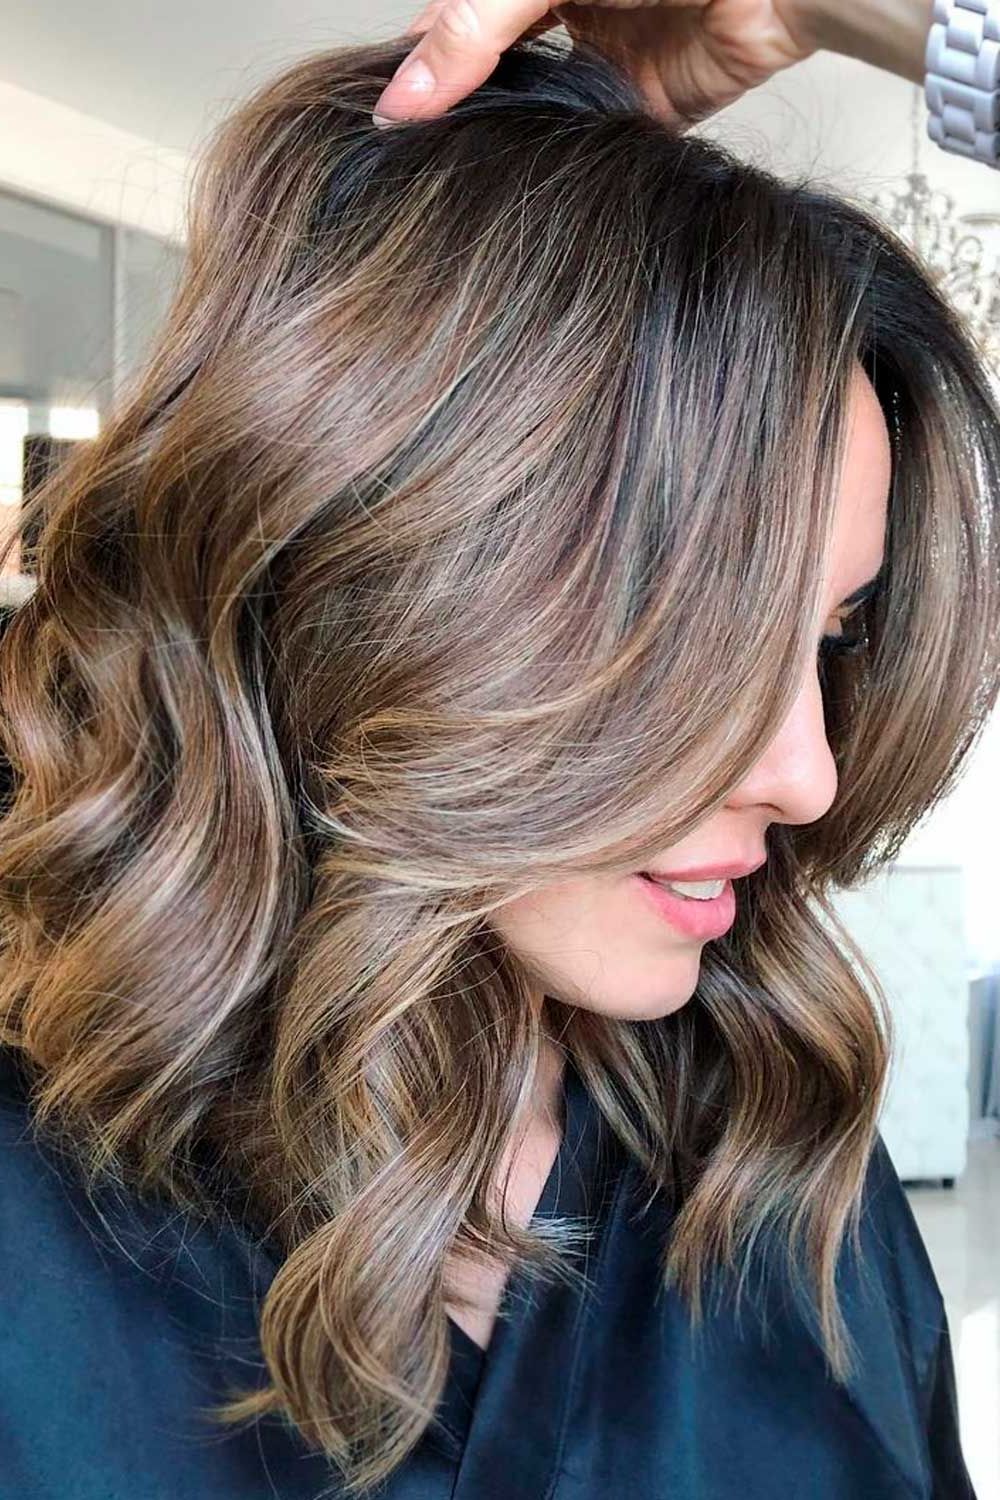 Untraditional Lob Haircut Ideas To Give A Try | Lovehairstyles Intended For Most Recently Layered Wavy Lob Haircuts (View 24 of 25)